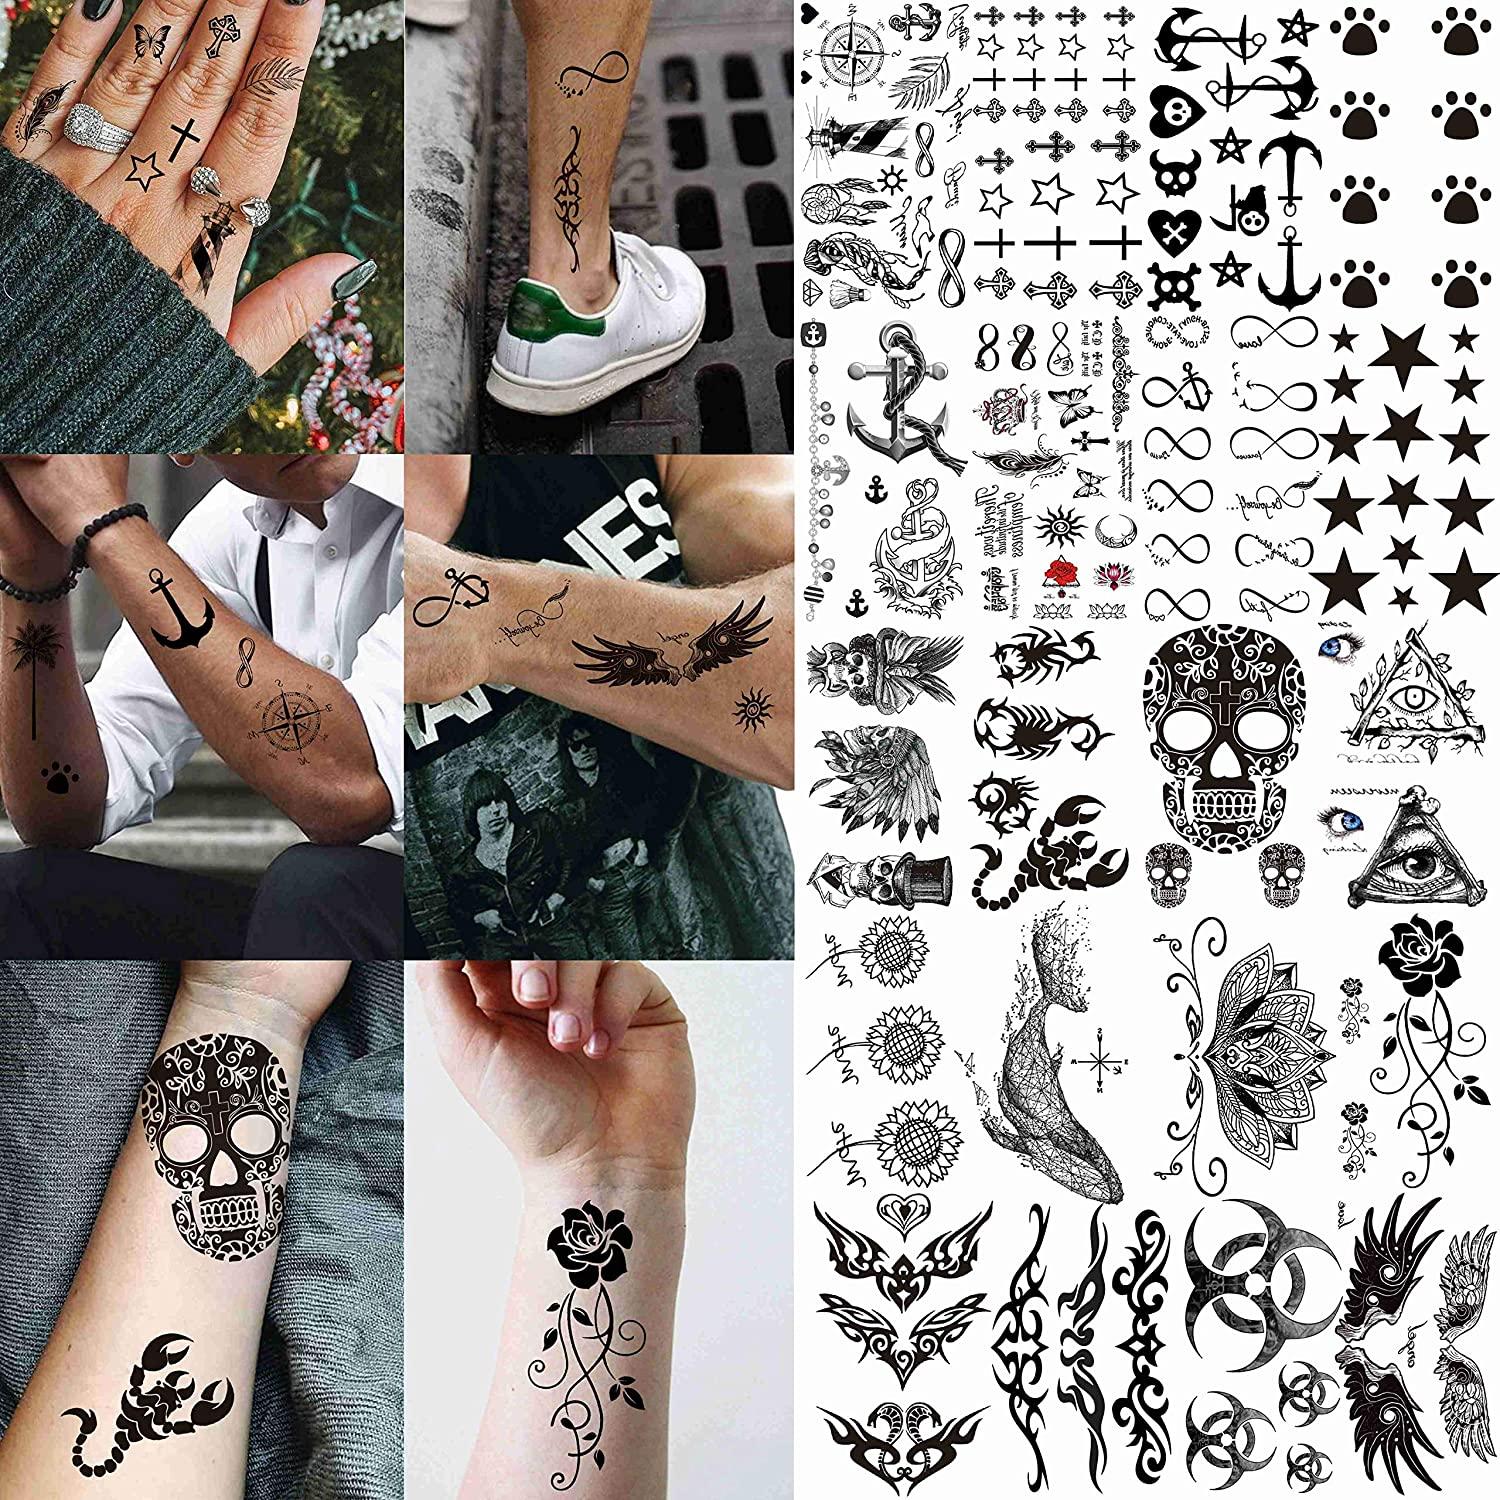 Temporary Tattoos, Small Size Body Art Stickers, Most Popular Fake Tattoo  Designs as Cross/Star/Letters/Butterfly/Compass/Bird/Cat/Feather etc. price  in Saudi Arabia | Amazon Saudi Arabia | kanbkam